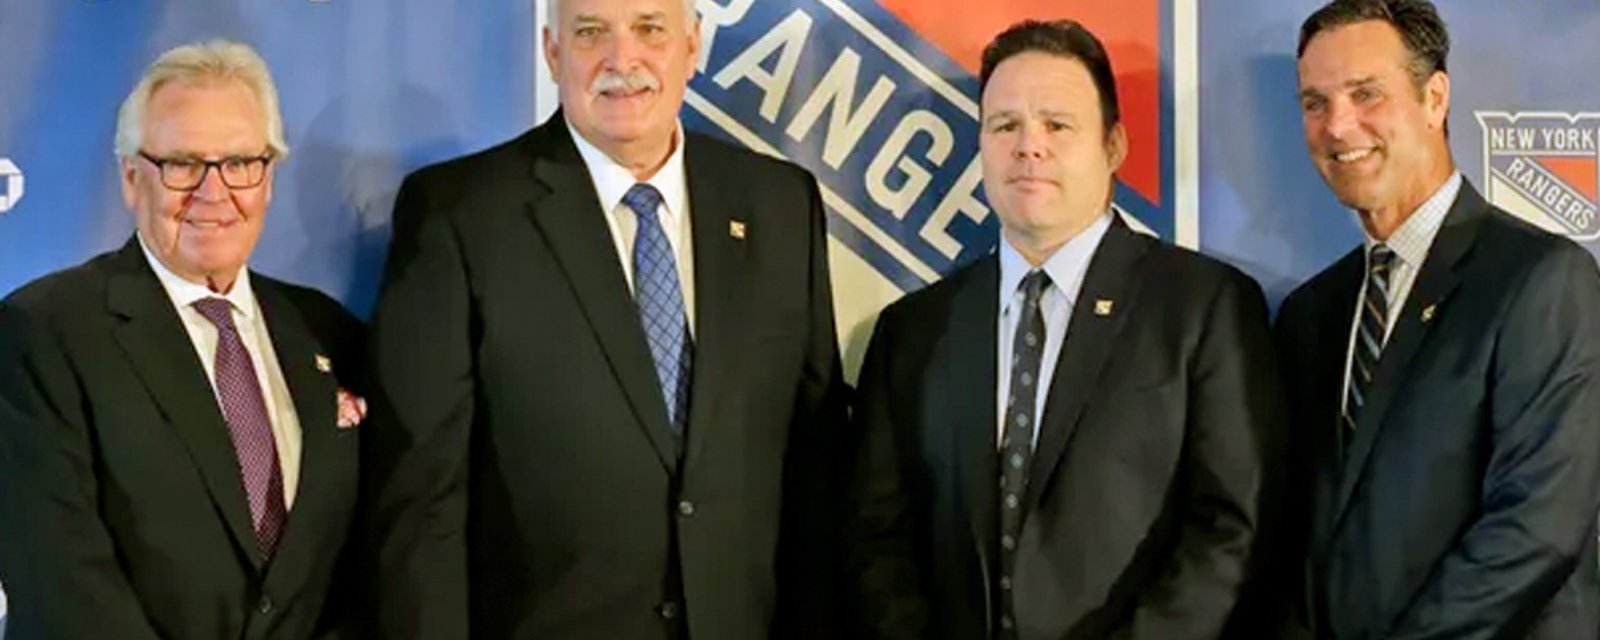 NHL GM's react to Rangers' surprise firings yesterday